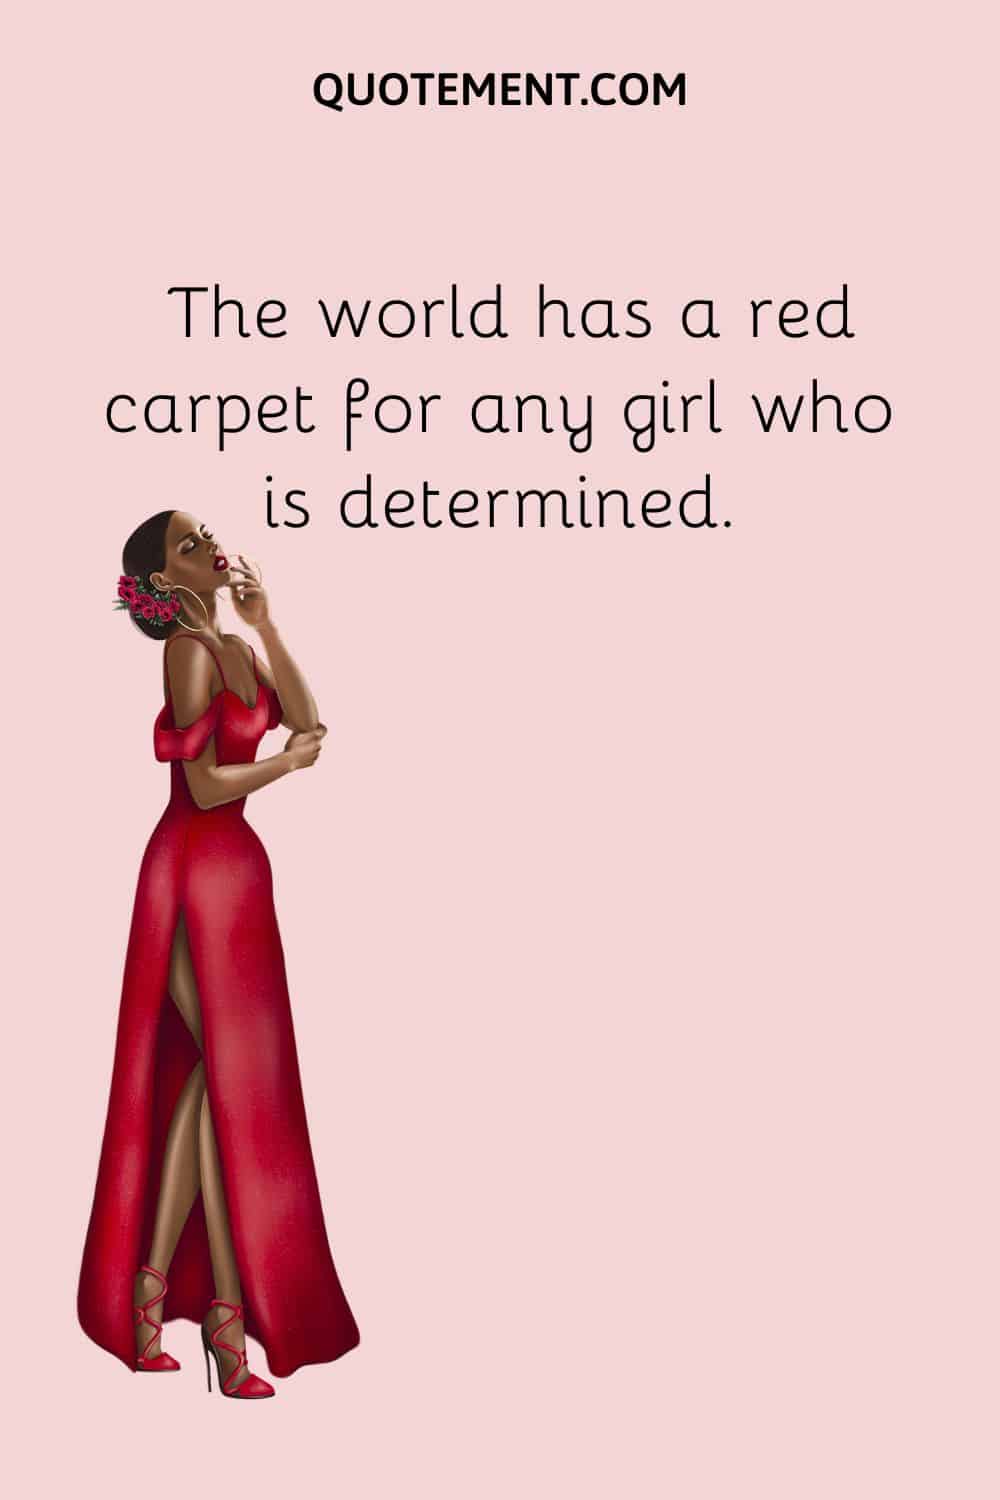 The world has a red carpet for any girl who is determined